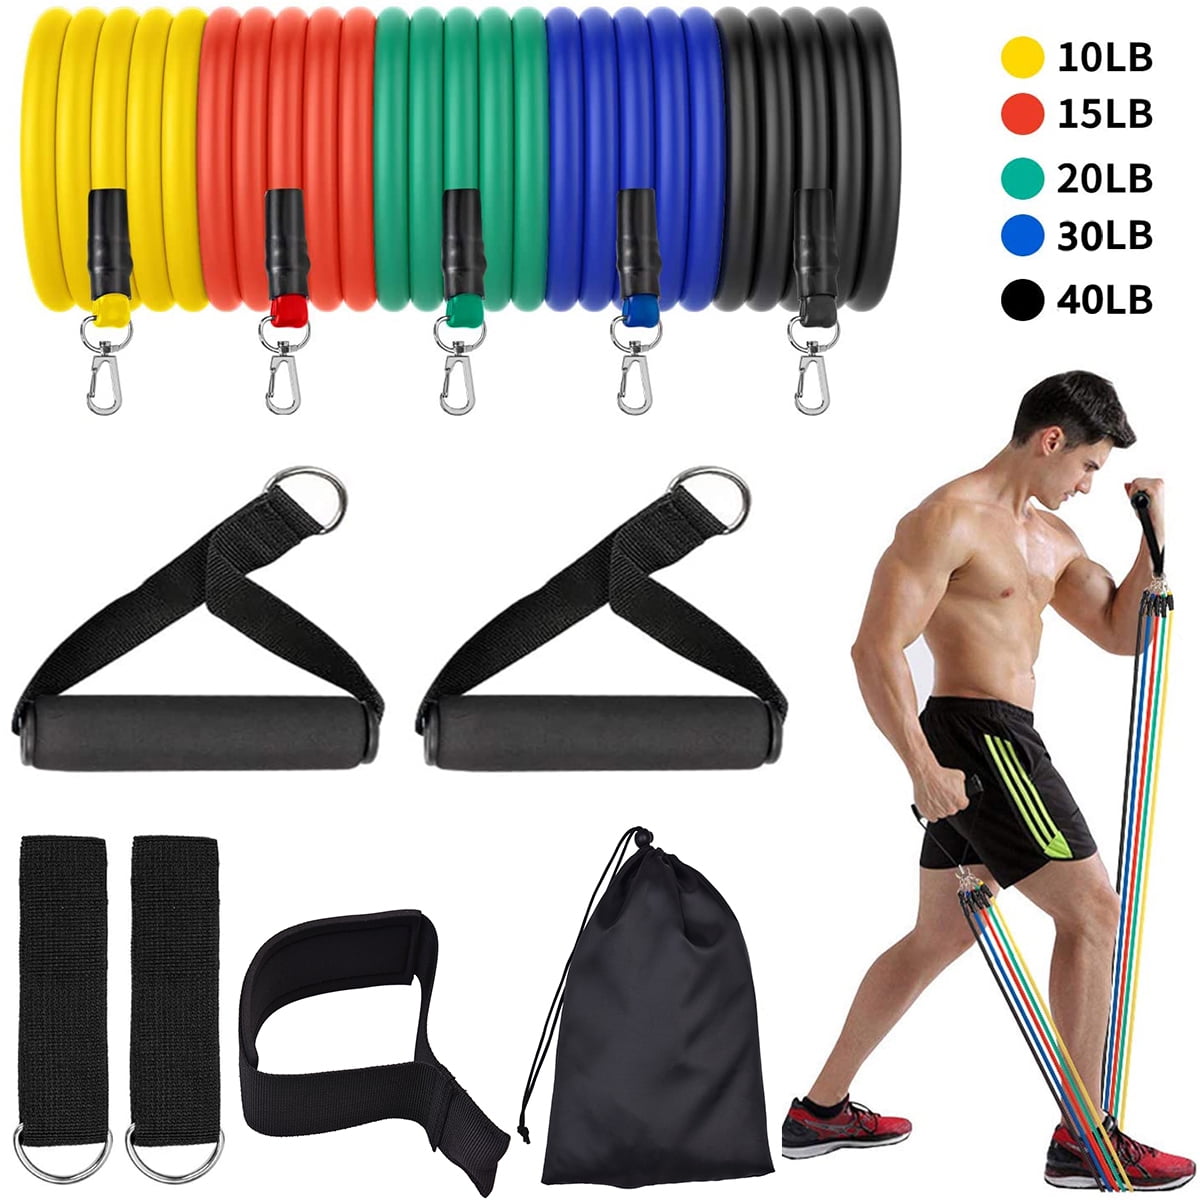 Physical Therapy 11 Set Home Workout Home Workout 10lbs to 50lbs Workout Bands Door Anchor Handles Ankle Straps Stackable Up to 150 lbs Resistance Training arteesol Resistance Bands Set